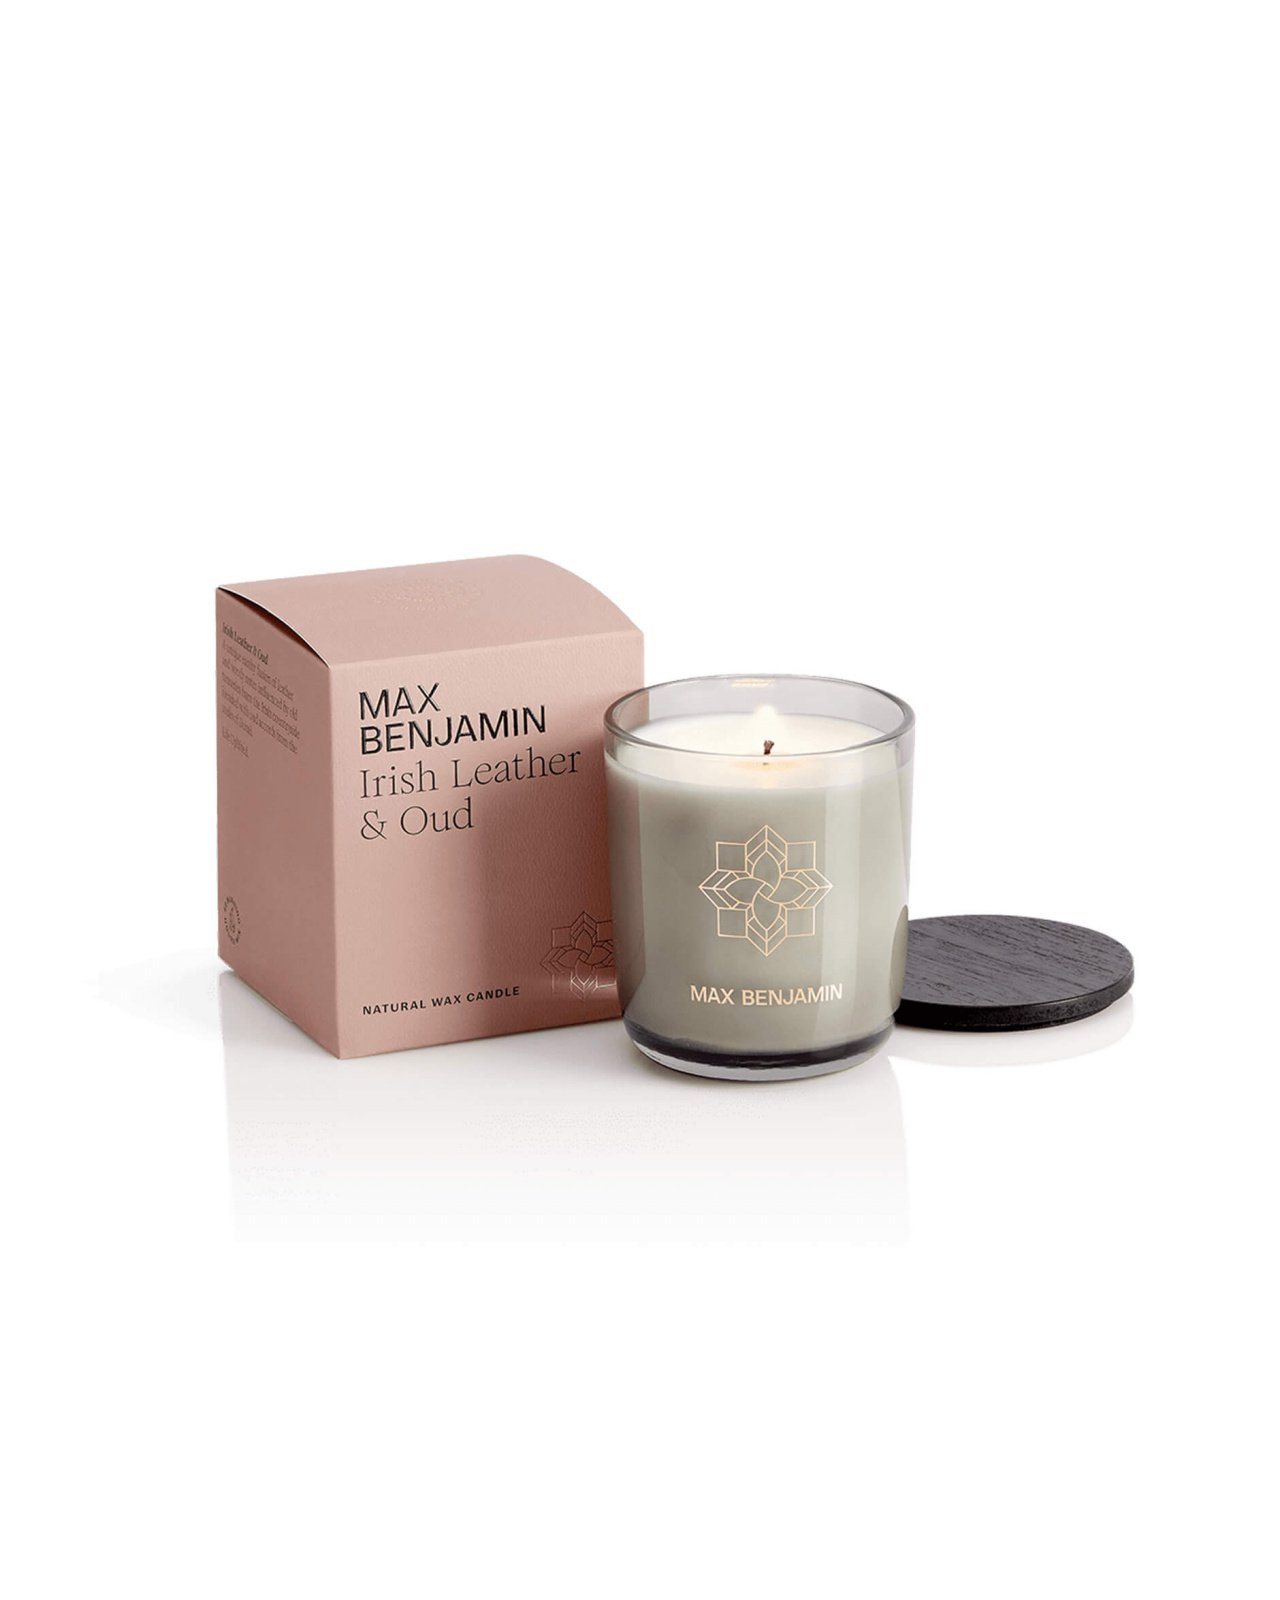 Irish Leather & Oud Scented Candle